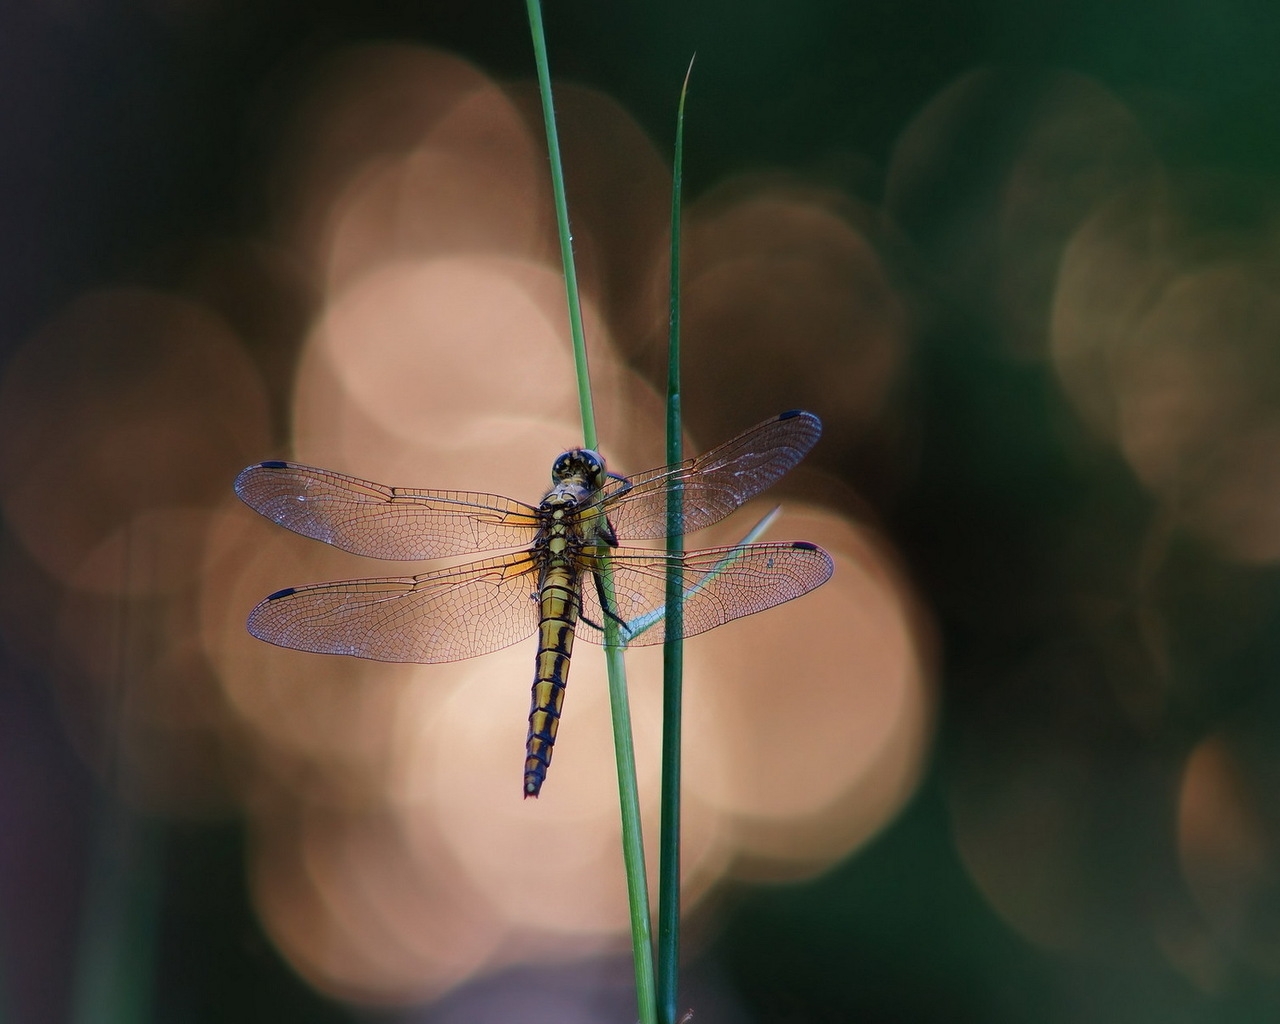 Blue Dragonfly on a Blade of Grass for 1280 x 1024 resolution